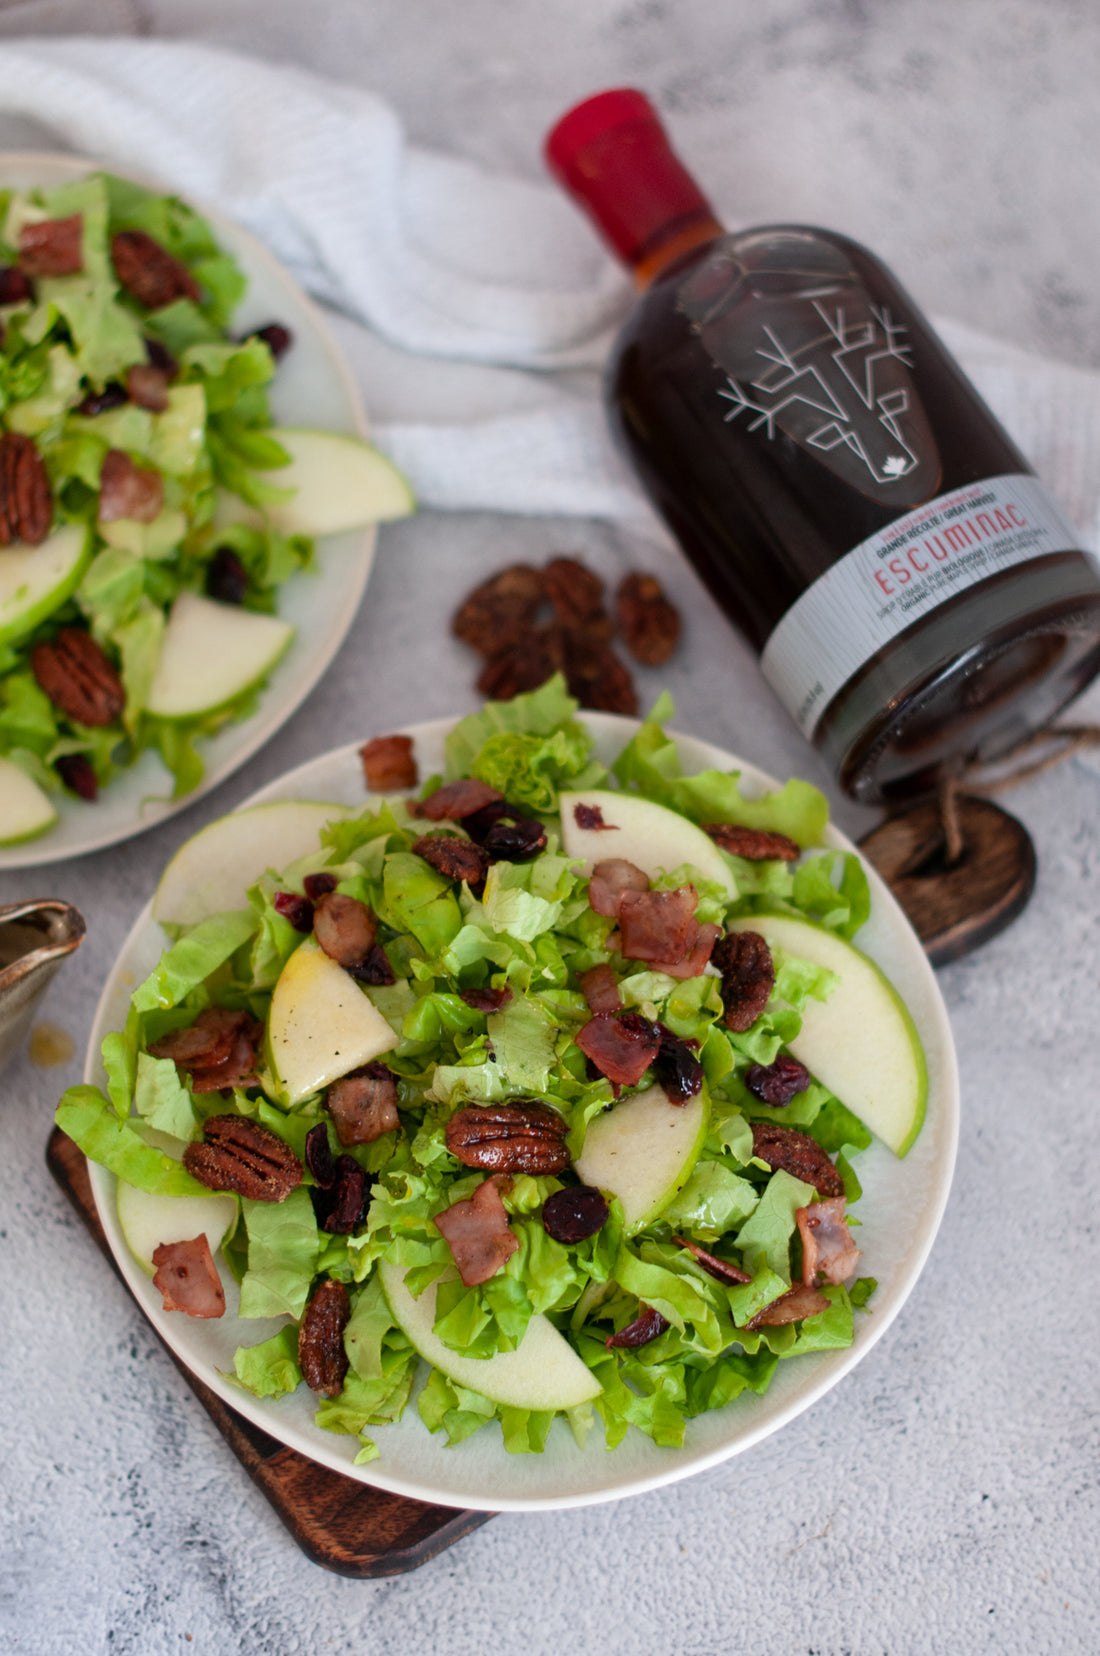 Apple Pecan and Bacon Salad with Maple Vinaigrette Dressing